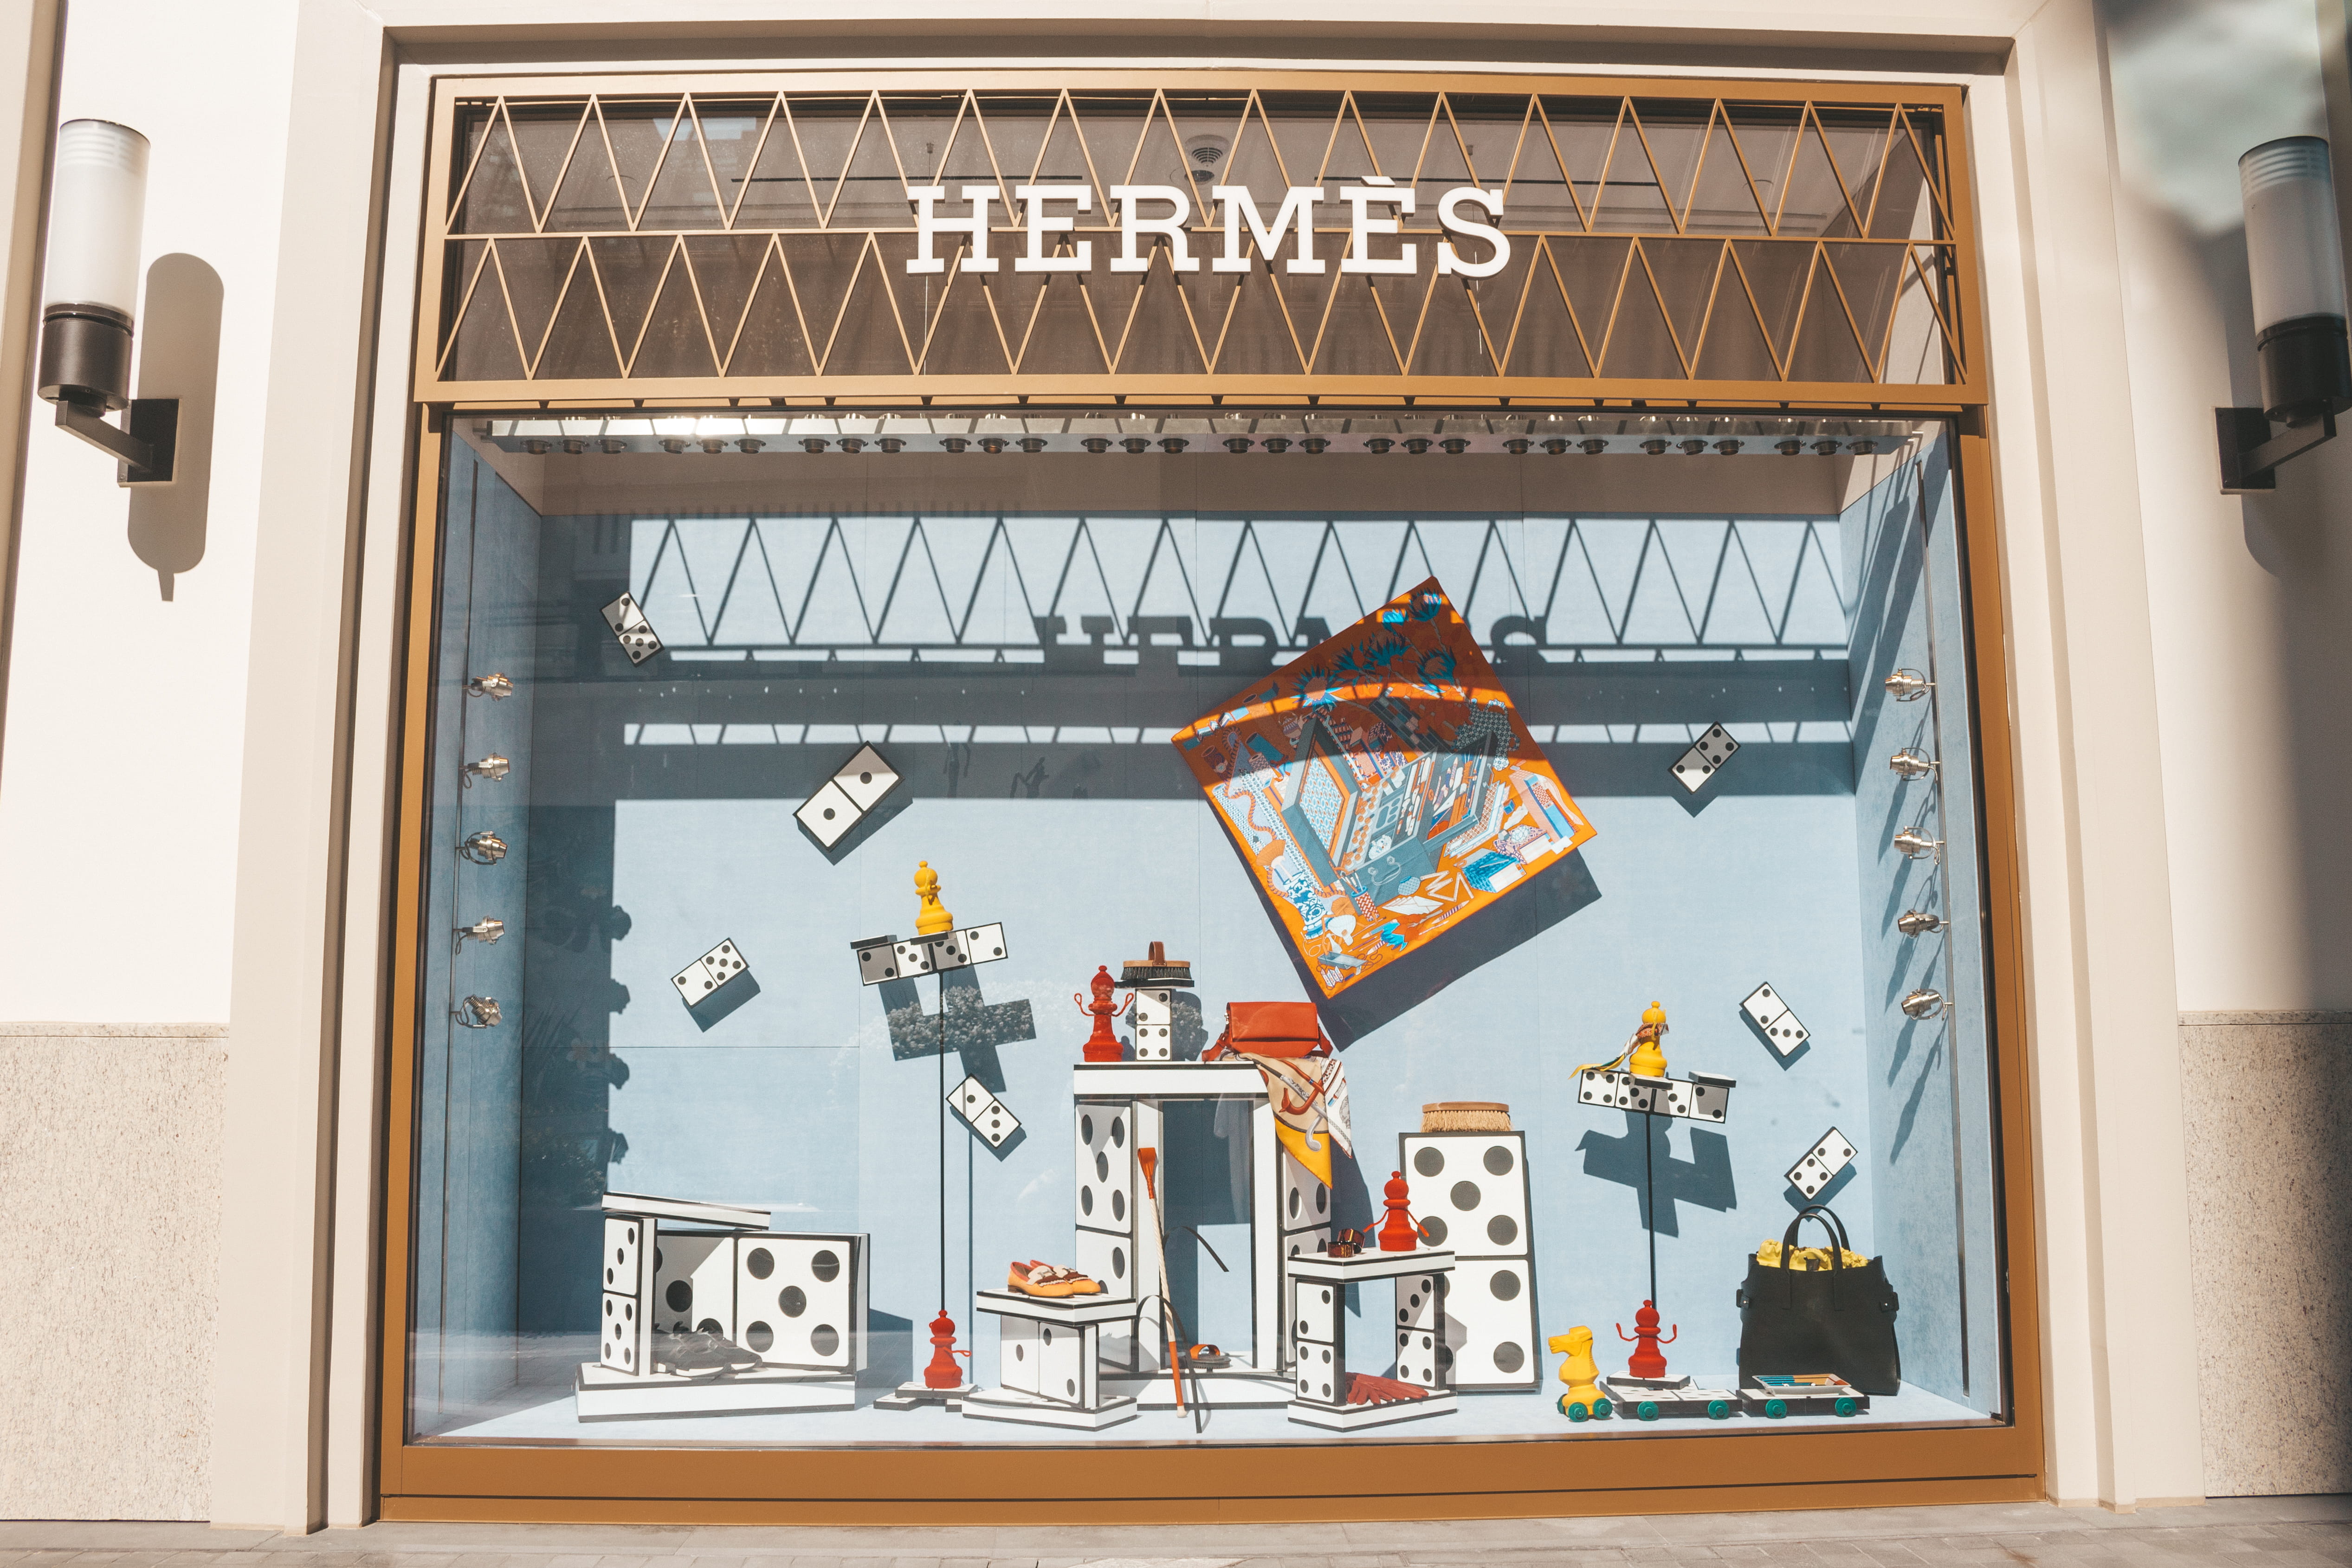 Opened Brown Gate Near Hermes Toys, apartment, architectural design